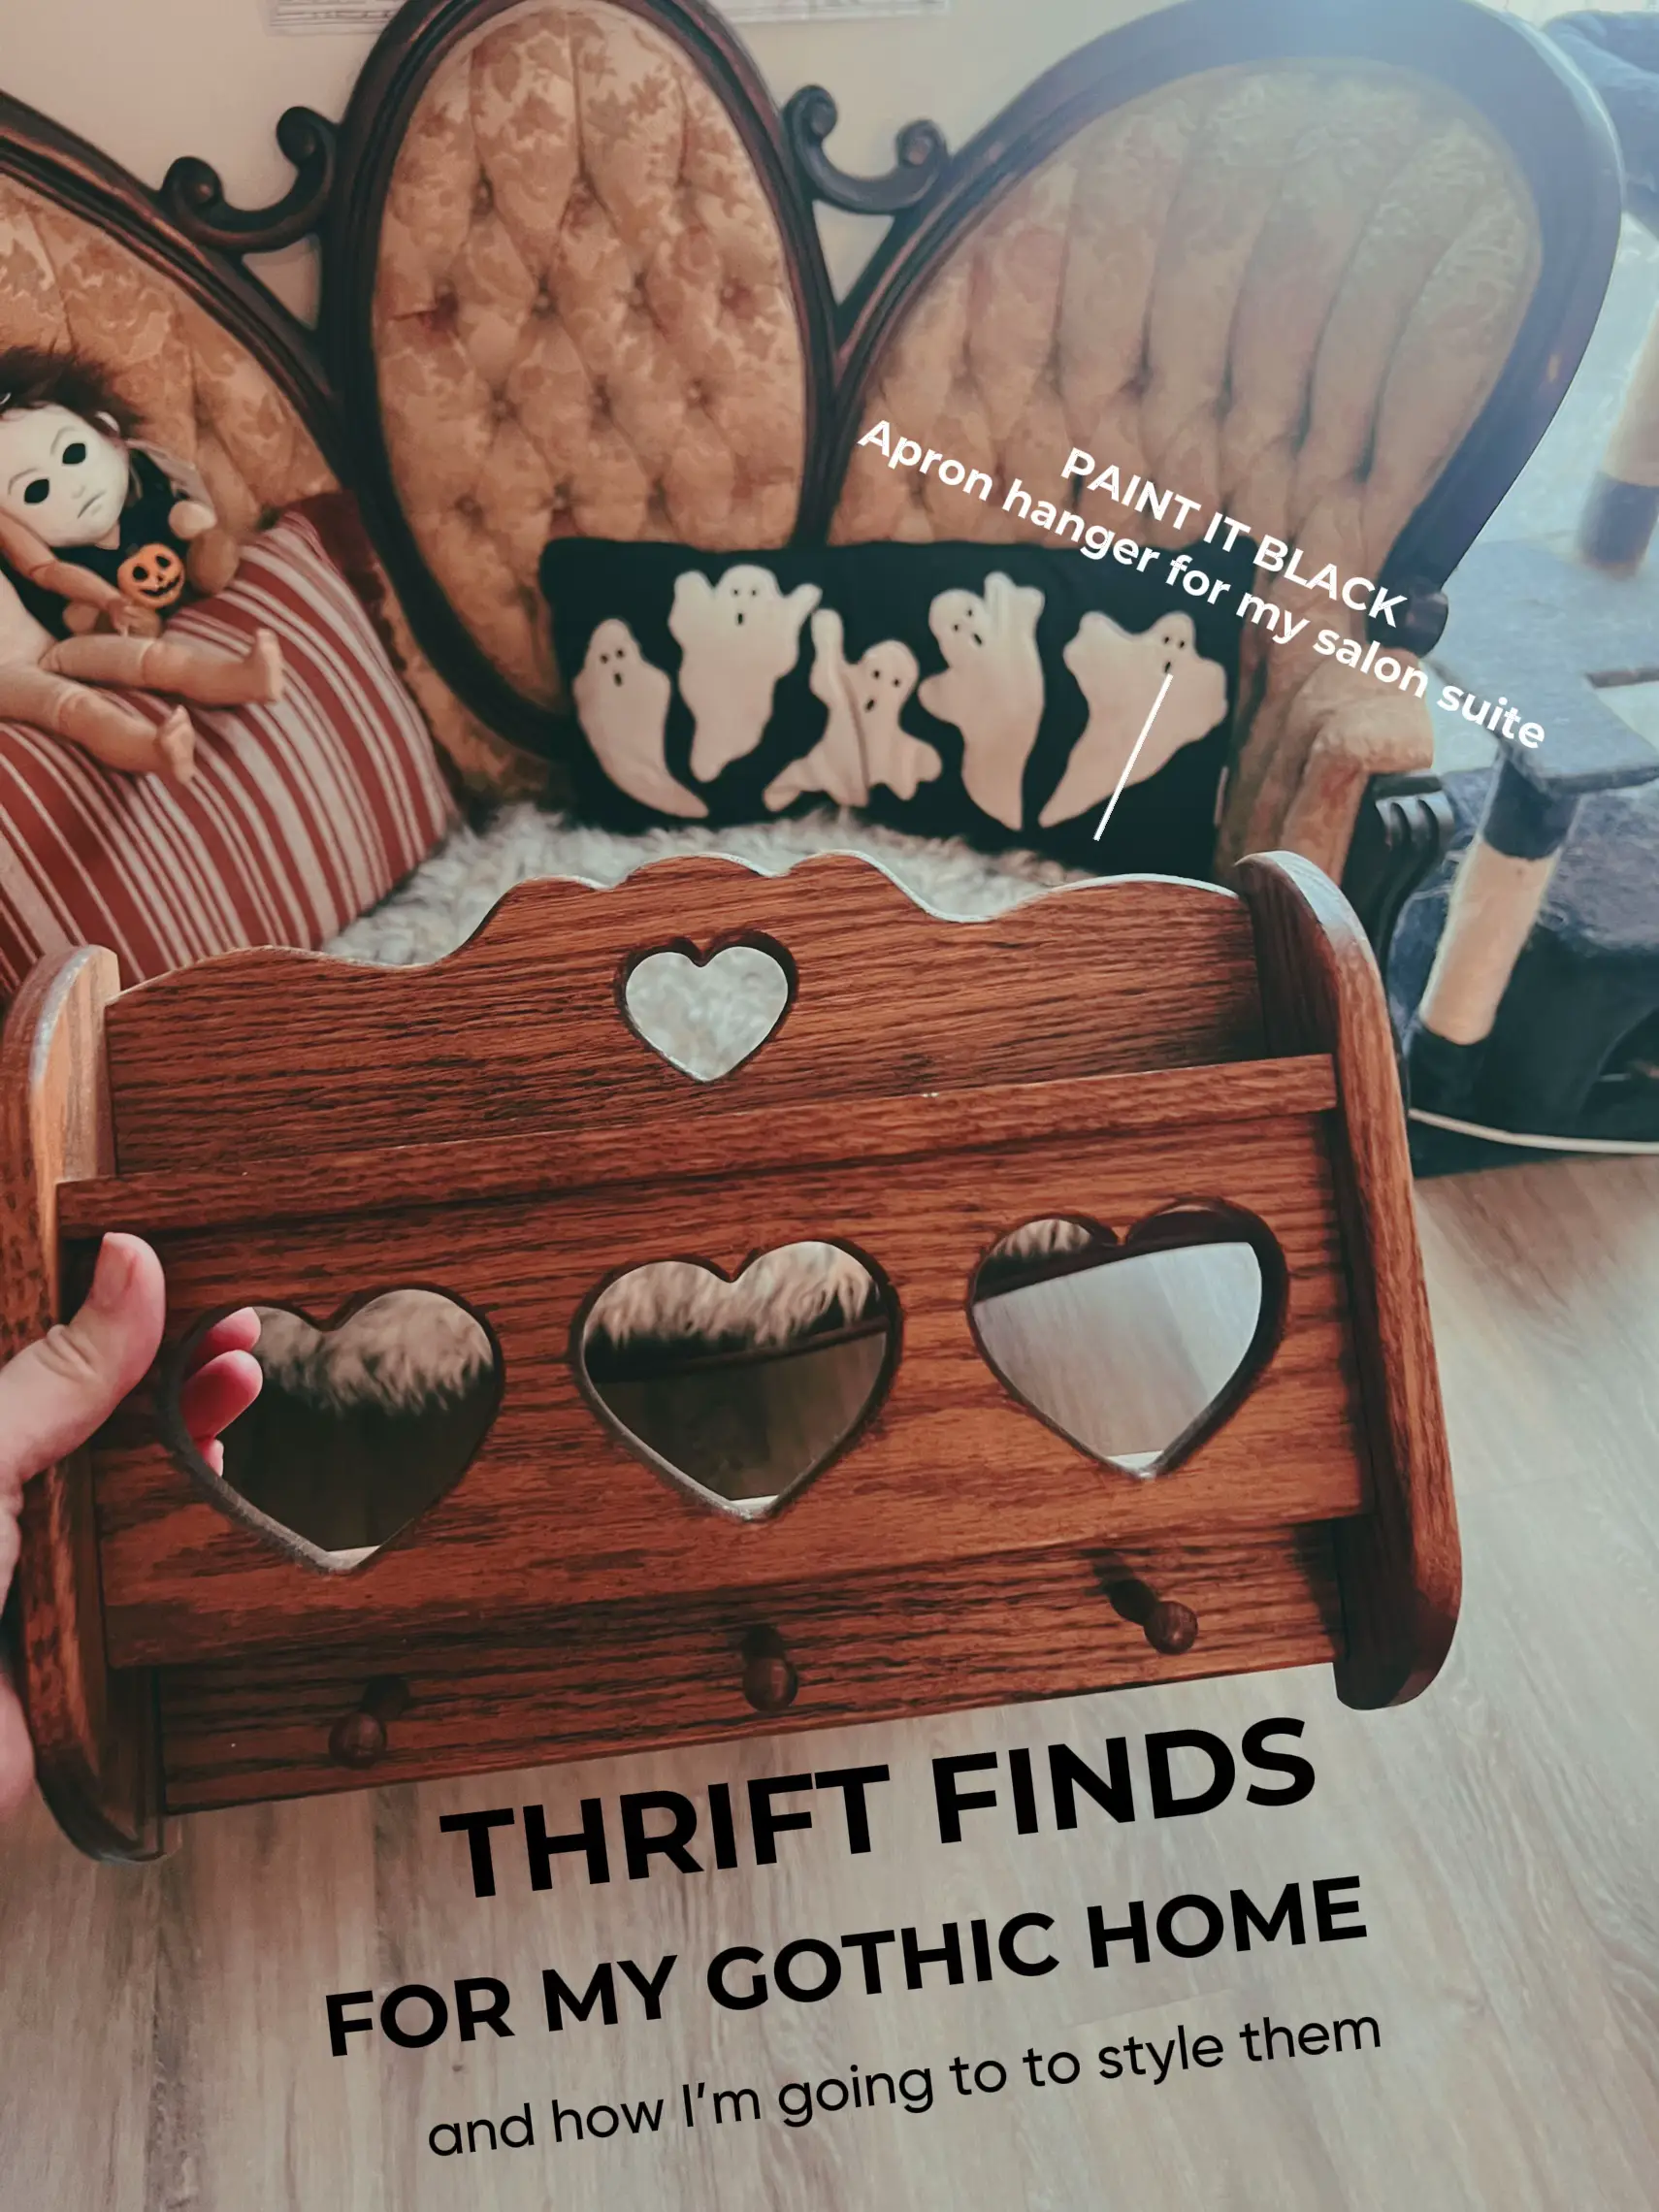 Budget Friendly Basket Wall With Goodwill Finds - A Heart Filled Home